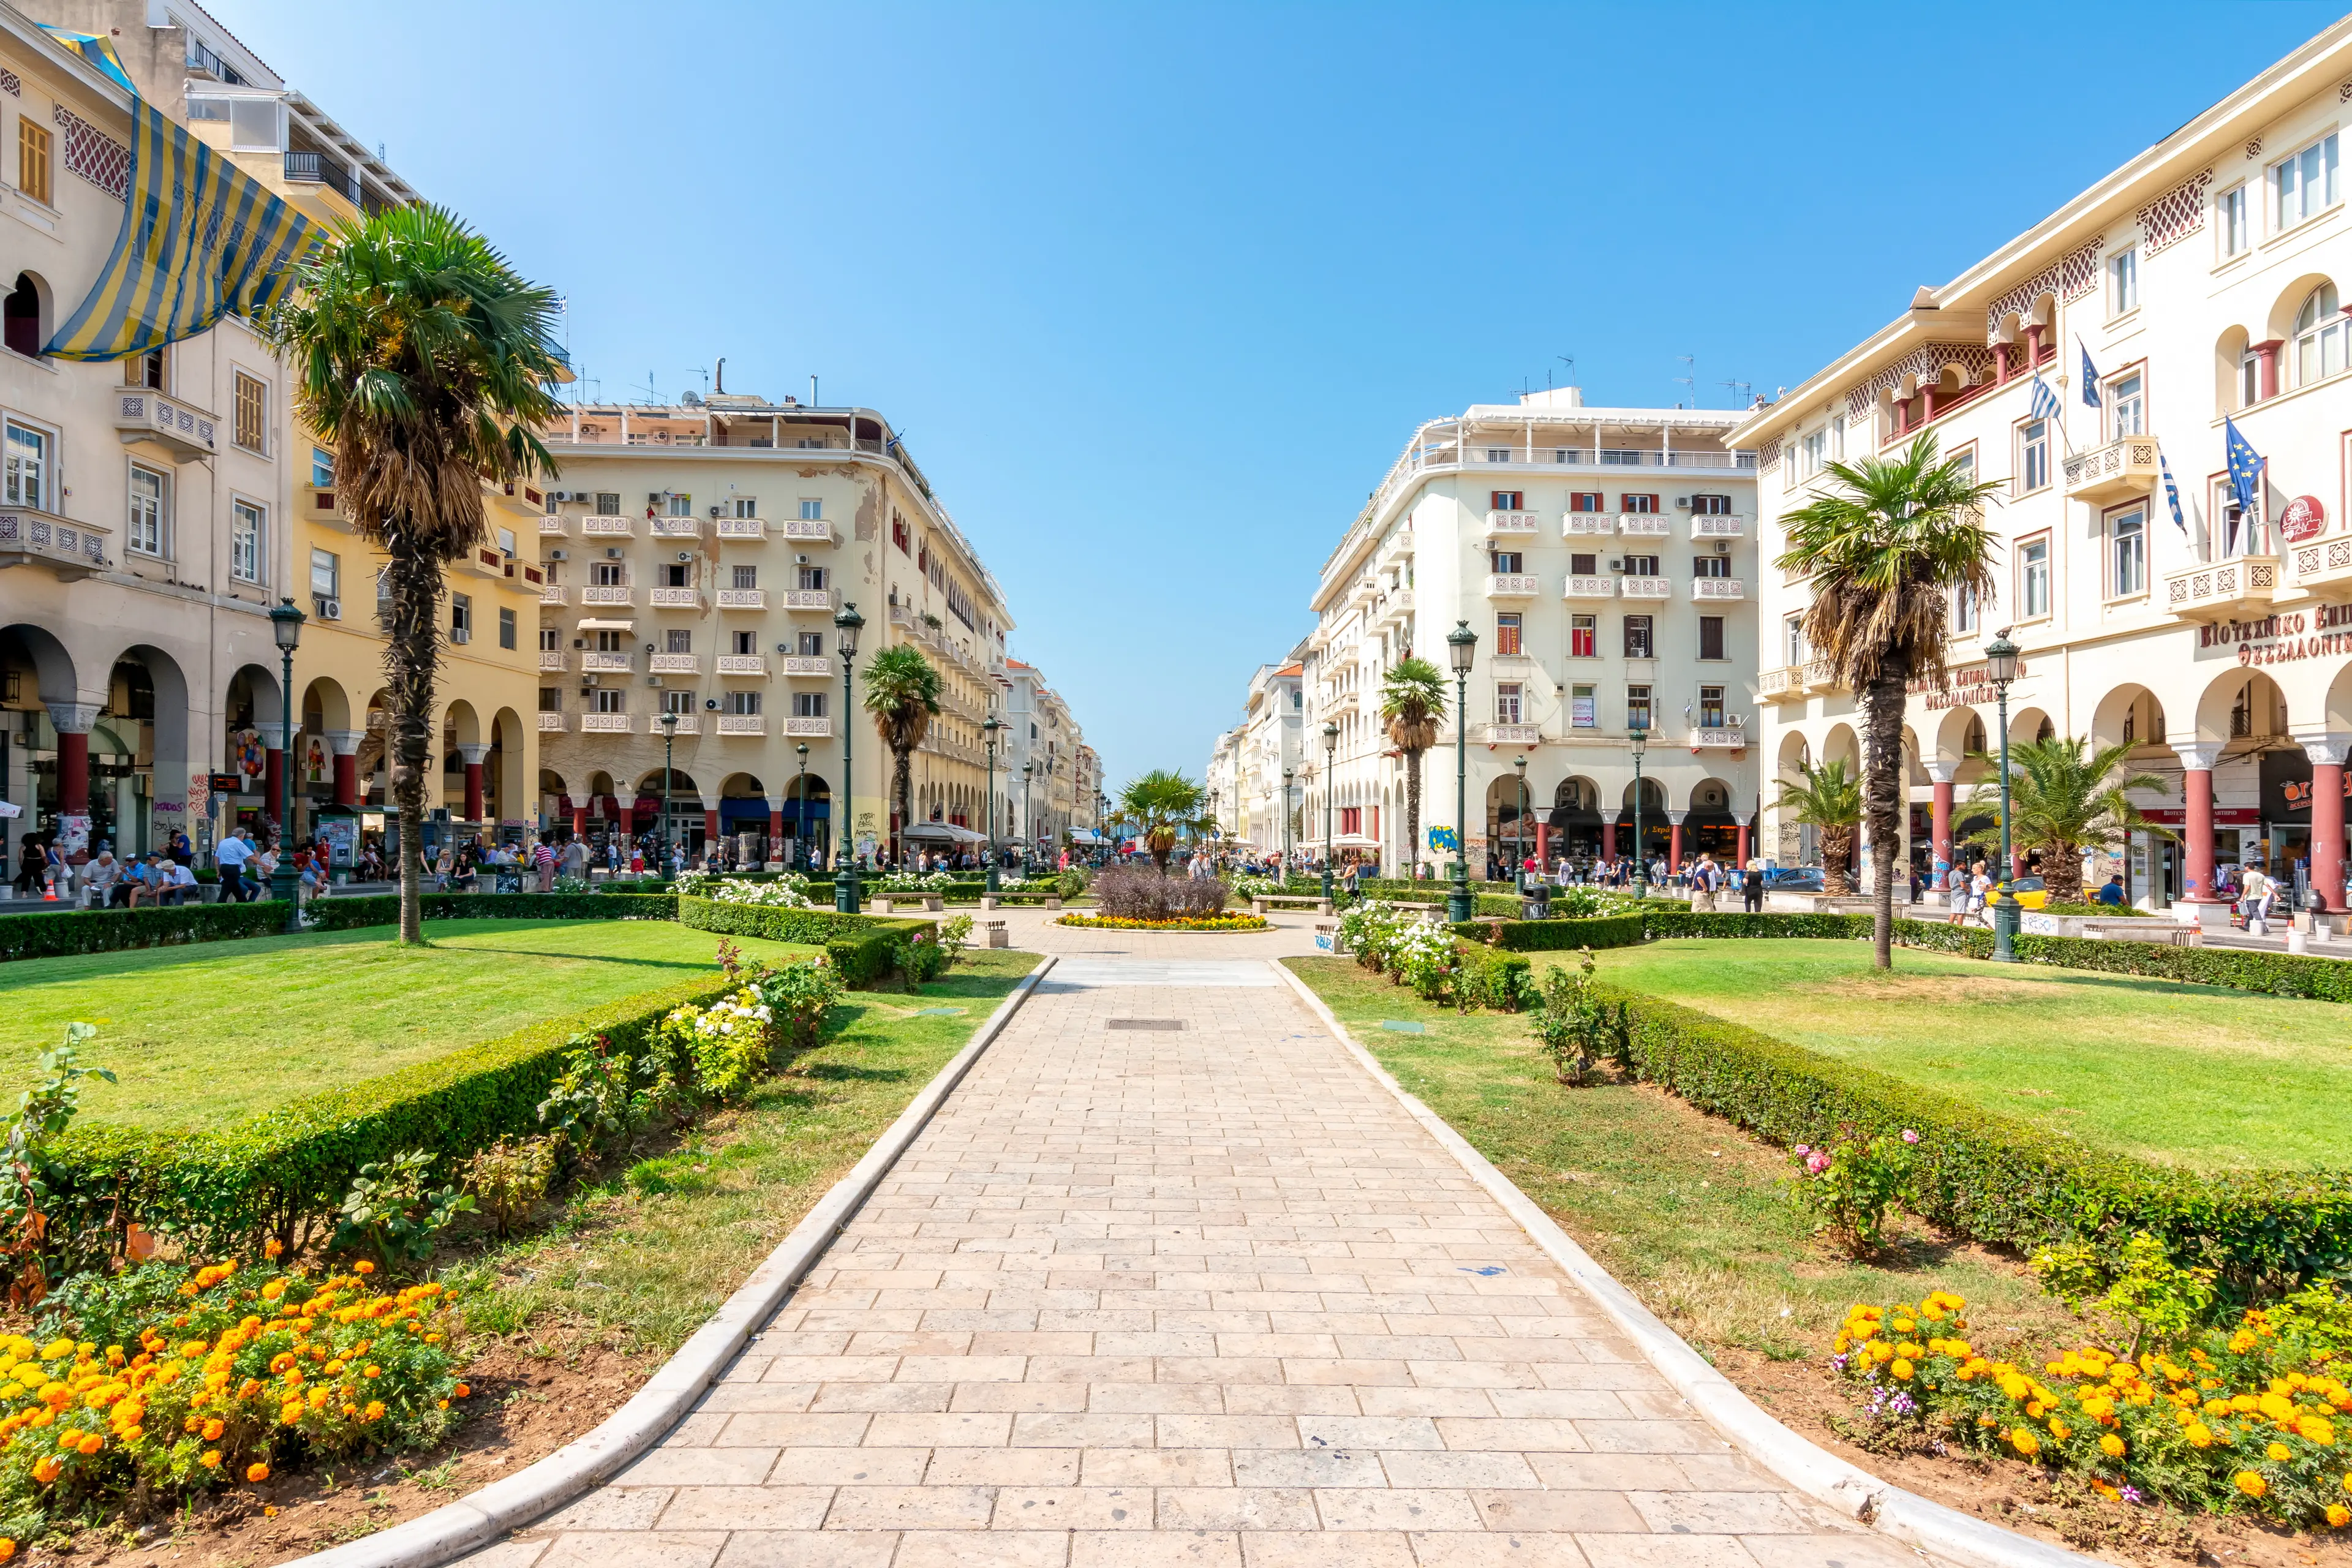 1-Day Relaxing Couples' Getaway in Thessaloniki, Greece